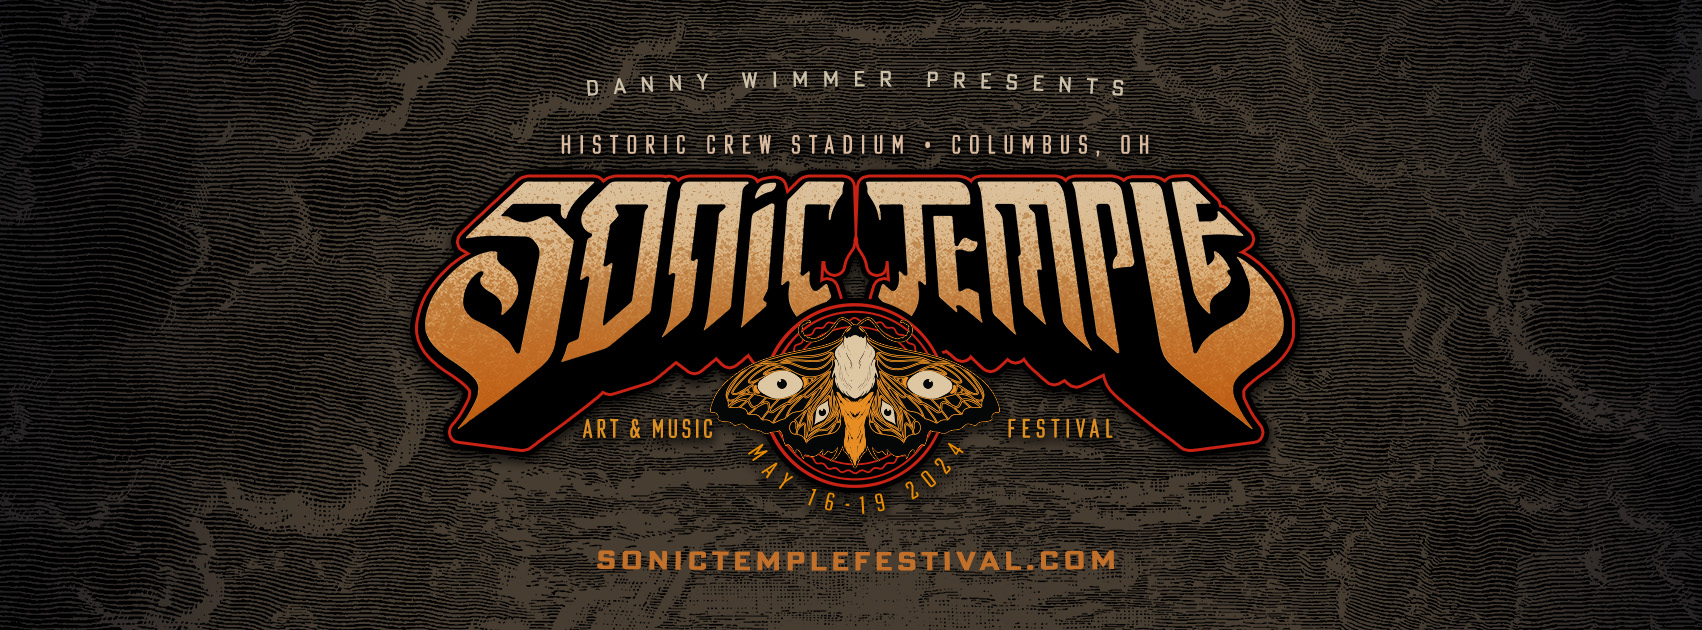 Sonic Temple Art & Music Festival Announces Music Set Times & Additional Onsite Activations For May 16-19 Event At Historic Crew Stadium In Columbus, OH Featuring Disturbed, The Original Misfits, Pantera, Slipknot & More